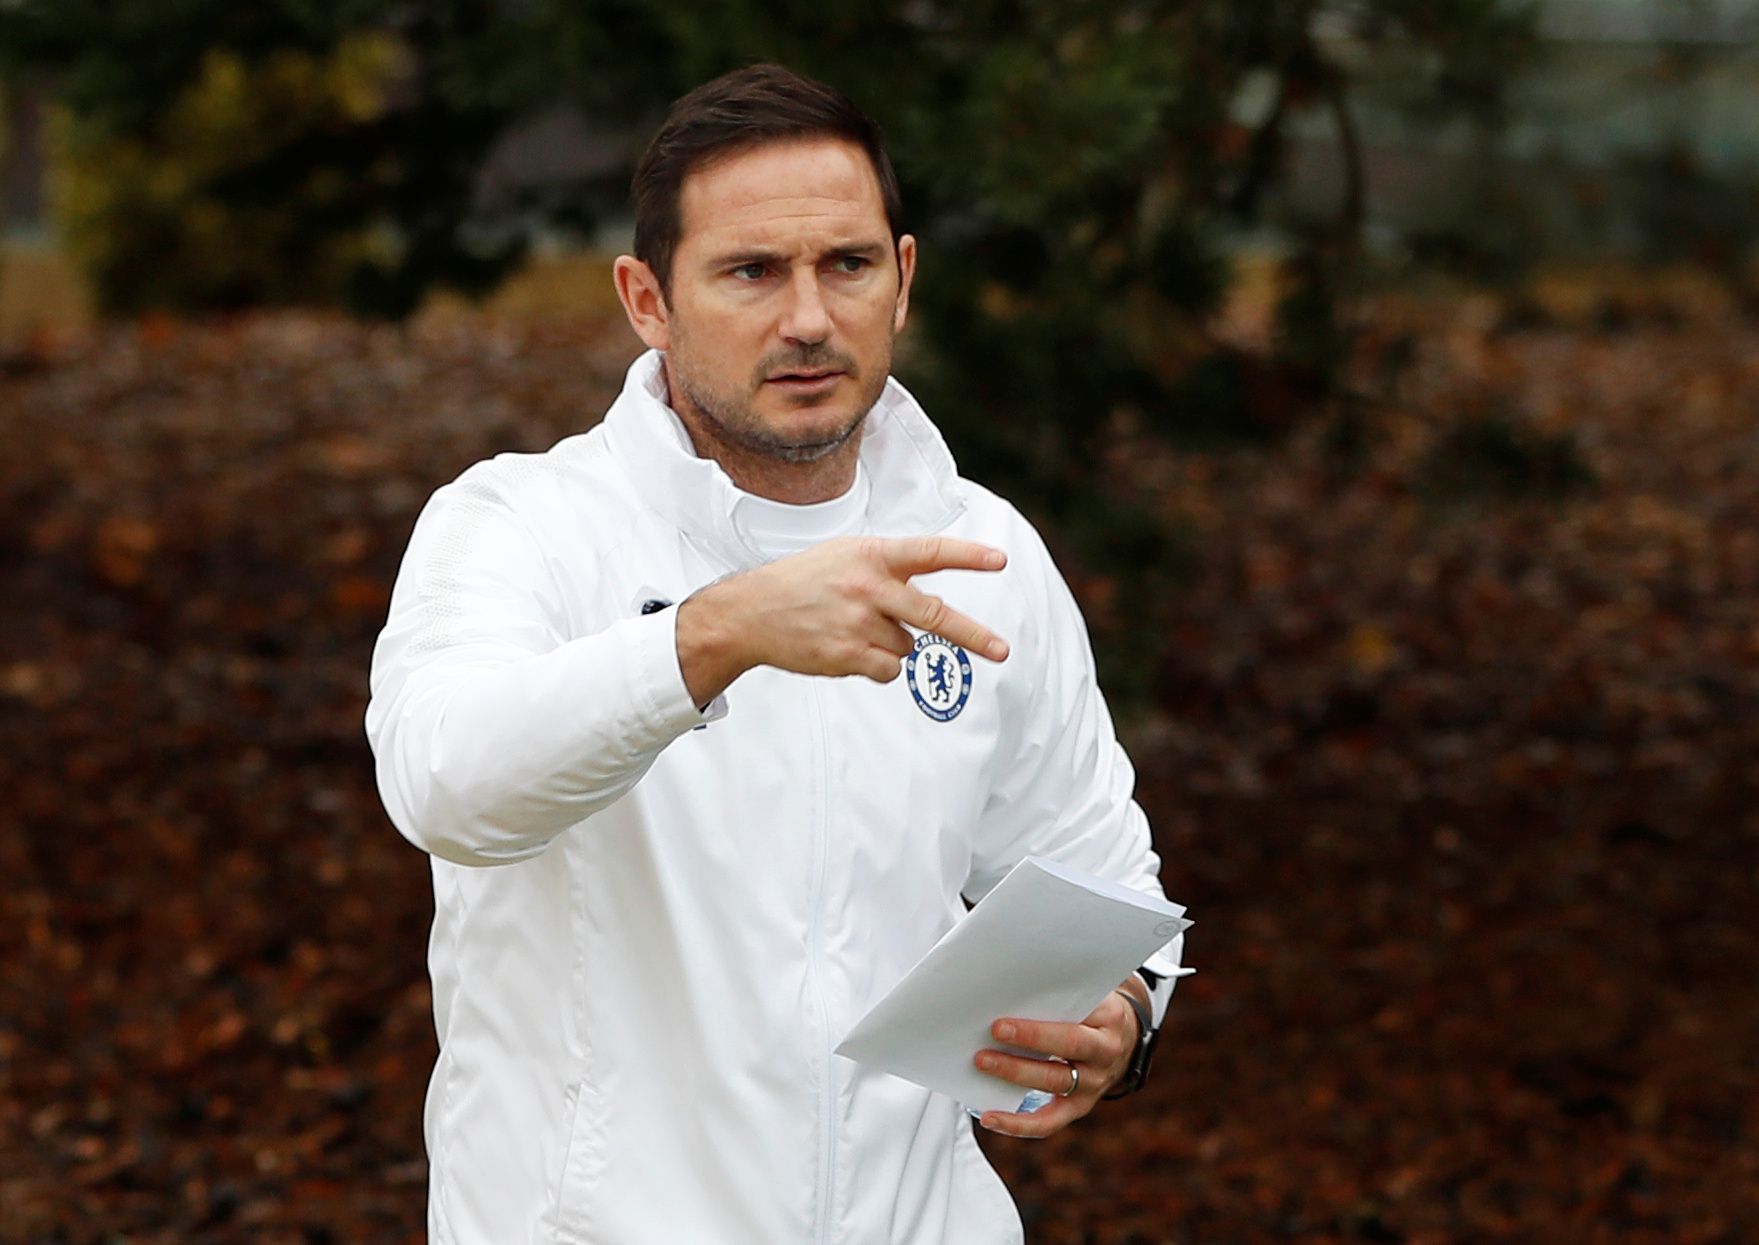 Soccer Football - Champions League - Chelsea Training - Cobham Training Centre, Cobham, Britain - November 26, 2019   Chelsea manager Frank Lampard during training   Action Images via Reuters/Paul Childs